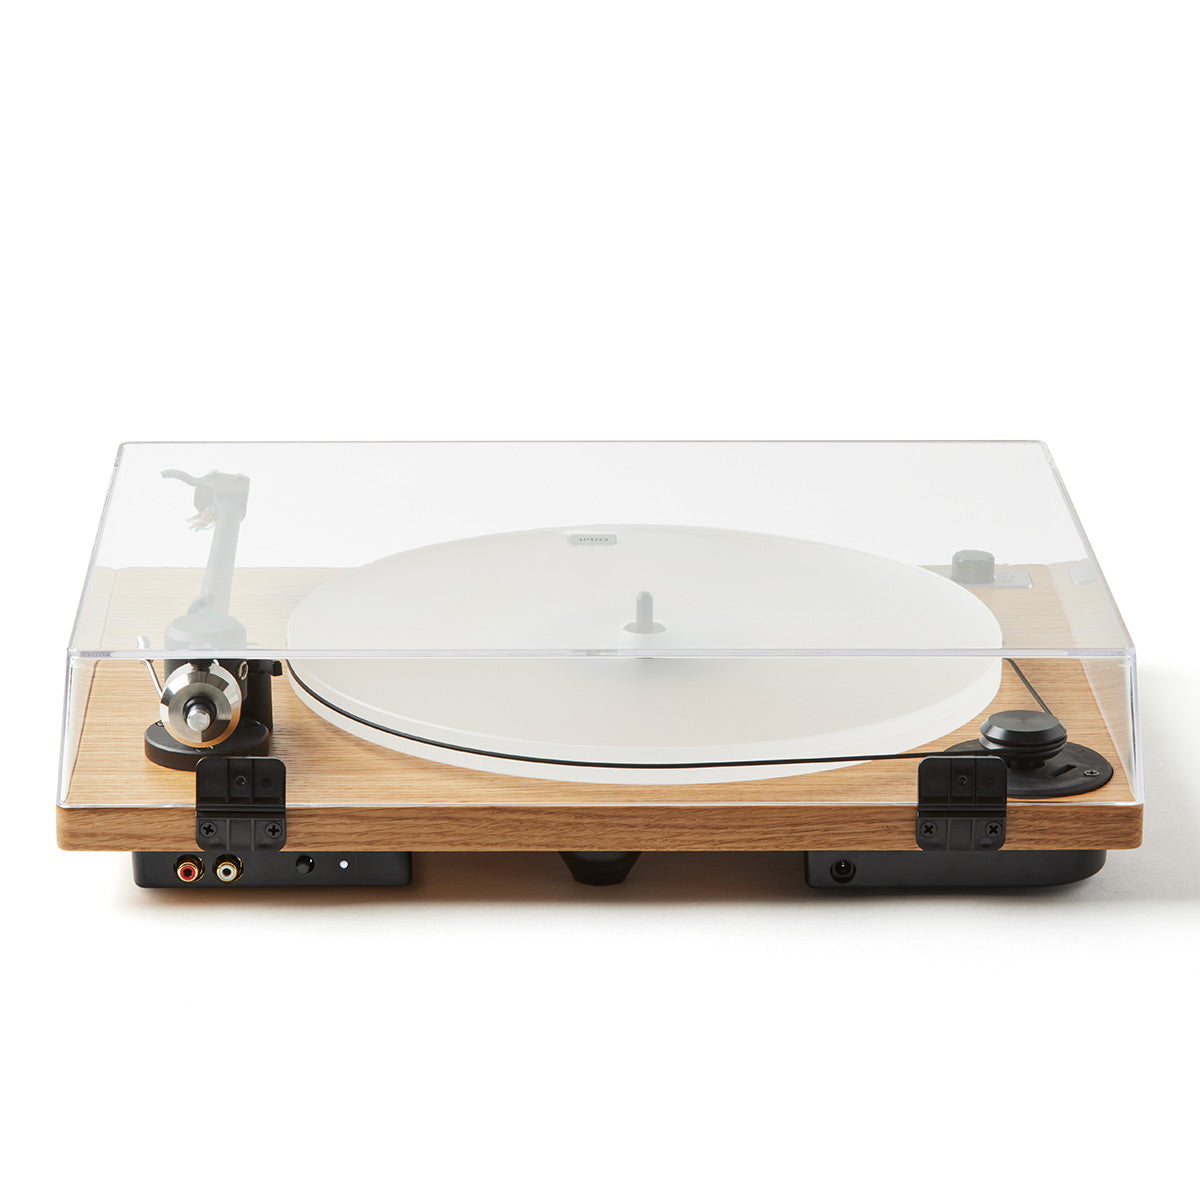 U-Turn Audio Orbit 2 Special Turntable with Built-In Preamp and Ortofon 2M Red Cartridge (Oak)